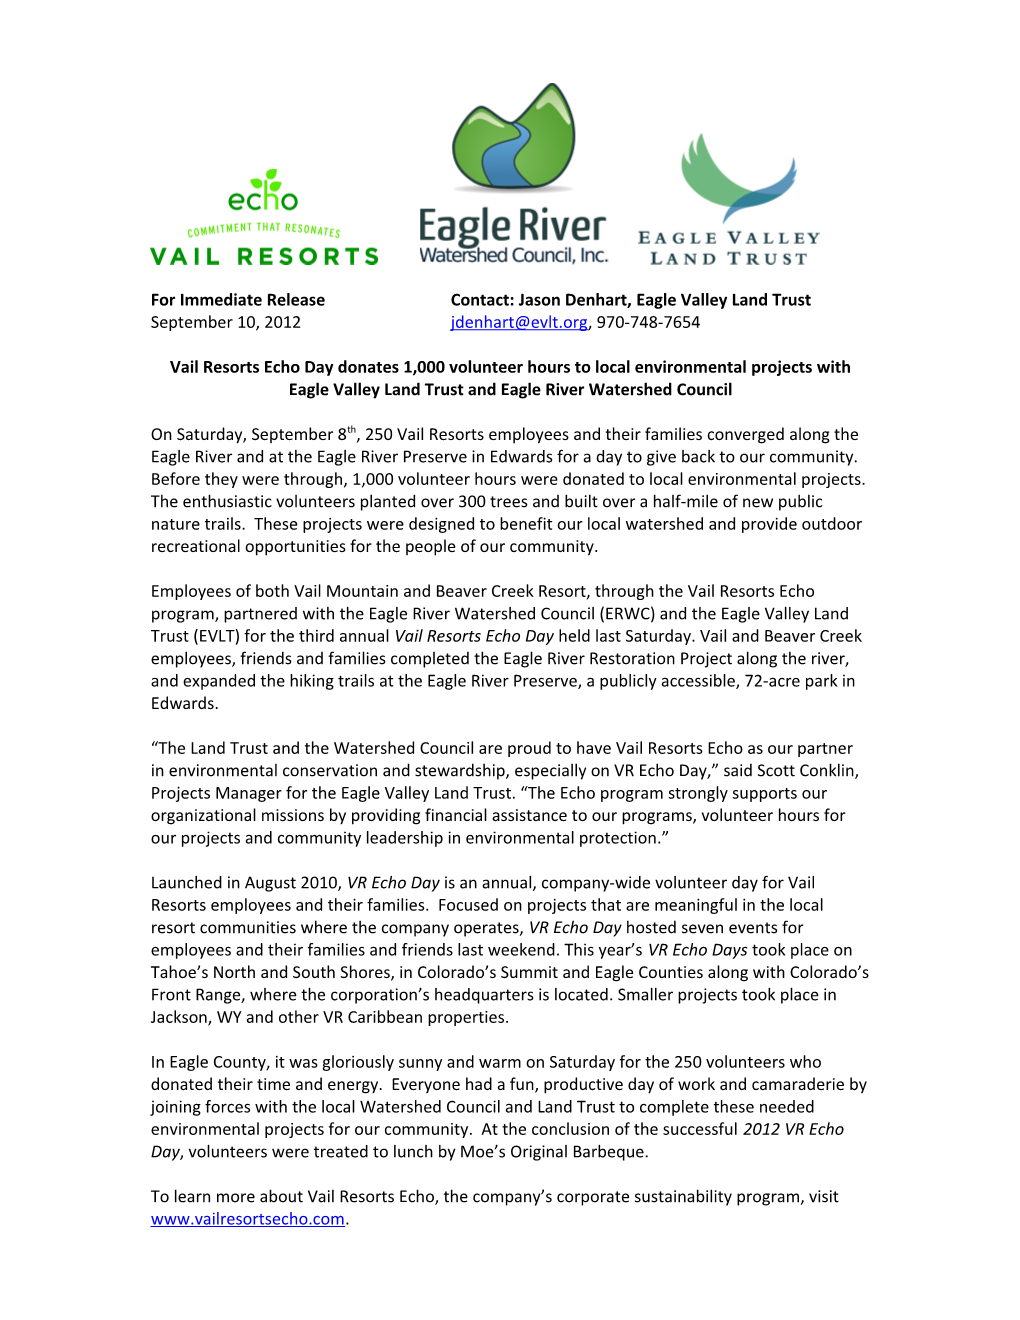 Vail Resorts Echo to Partner with Eagle River Watershed Council for October S VR Echo Day